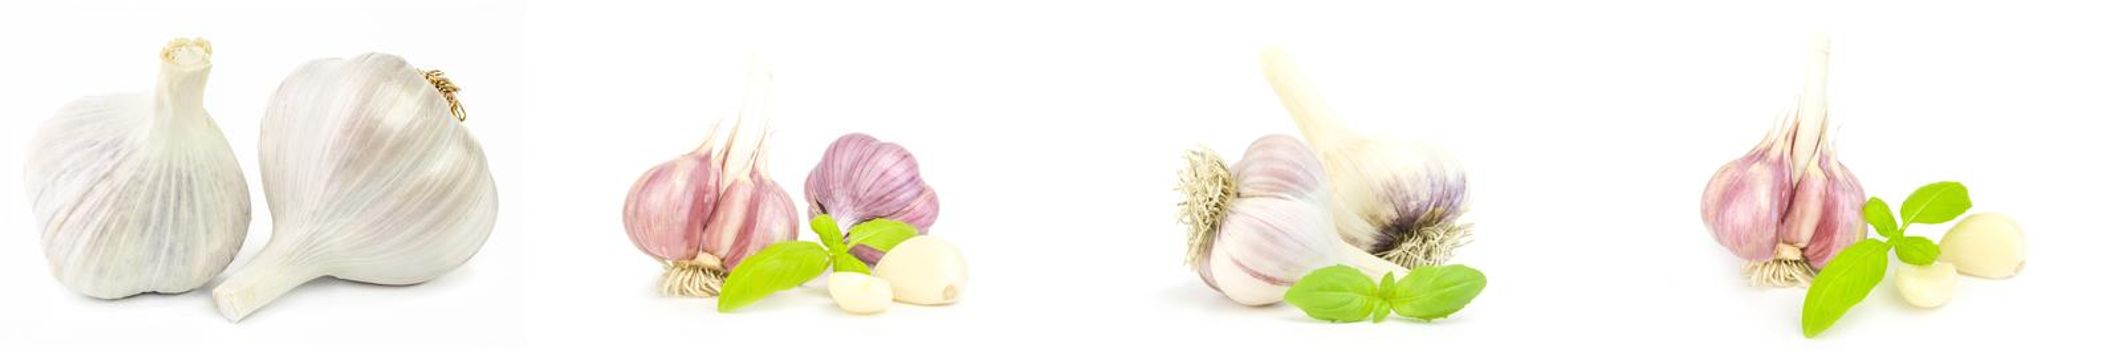 Collage of Garlic isolated on a white background cutout